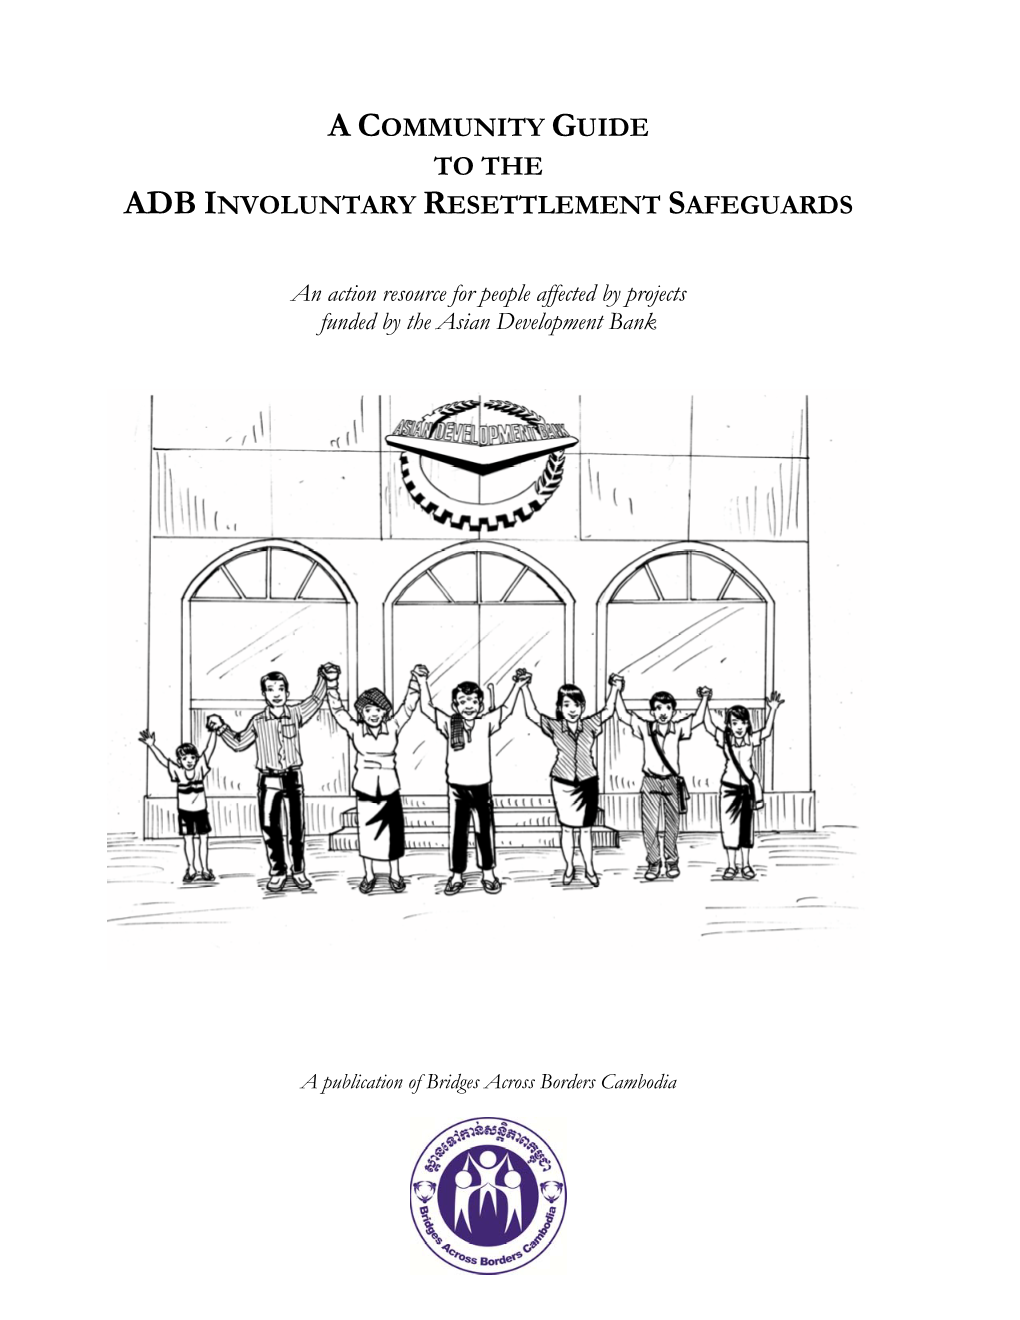 A Community Guide to the Adb Involuntary Resettlement Safeguards